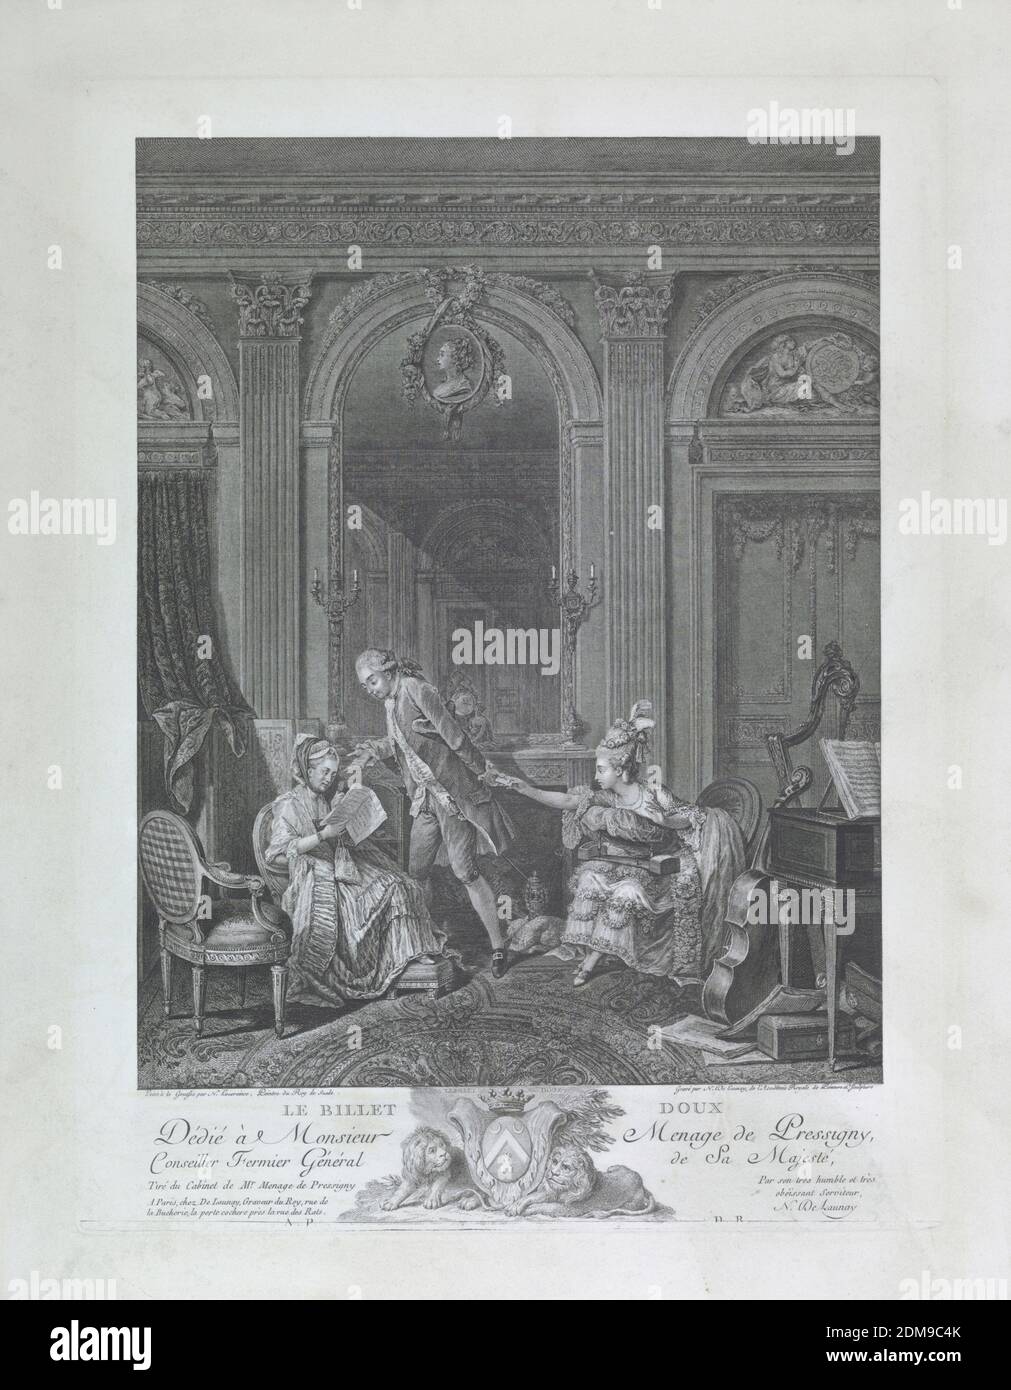 Le Billet Doux, Nicolas Delaunay, French, 1739–1792, Nicolas Lavreince, Swedish, 1737–1807, Engraving and etching on white paper, Print after a gouache work by Niclas Lafrensen, the younger. Shows an interior featuring a man and two women. The woman on the right is handed a folded letter by the standing man in the center, as she reaches towards him. She is seated with a small musical instrument is in her lap. The second woman appears to the left of the man; she is seated and reading a sheet of music. A harp, cello, and harpsichord stand to the right Stock Photo